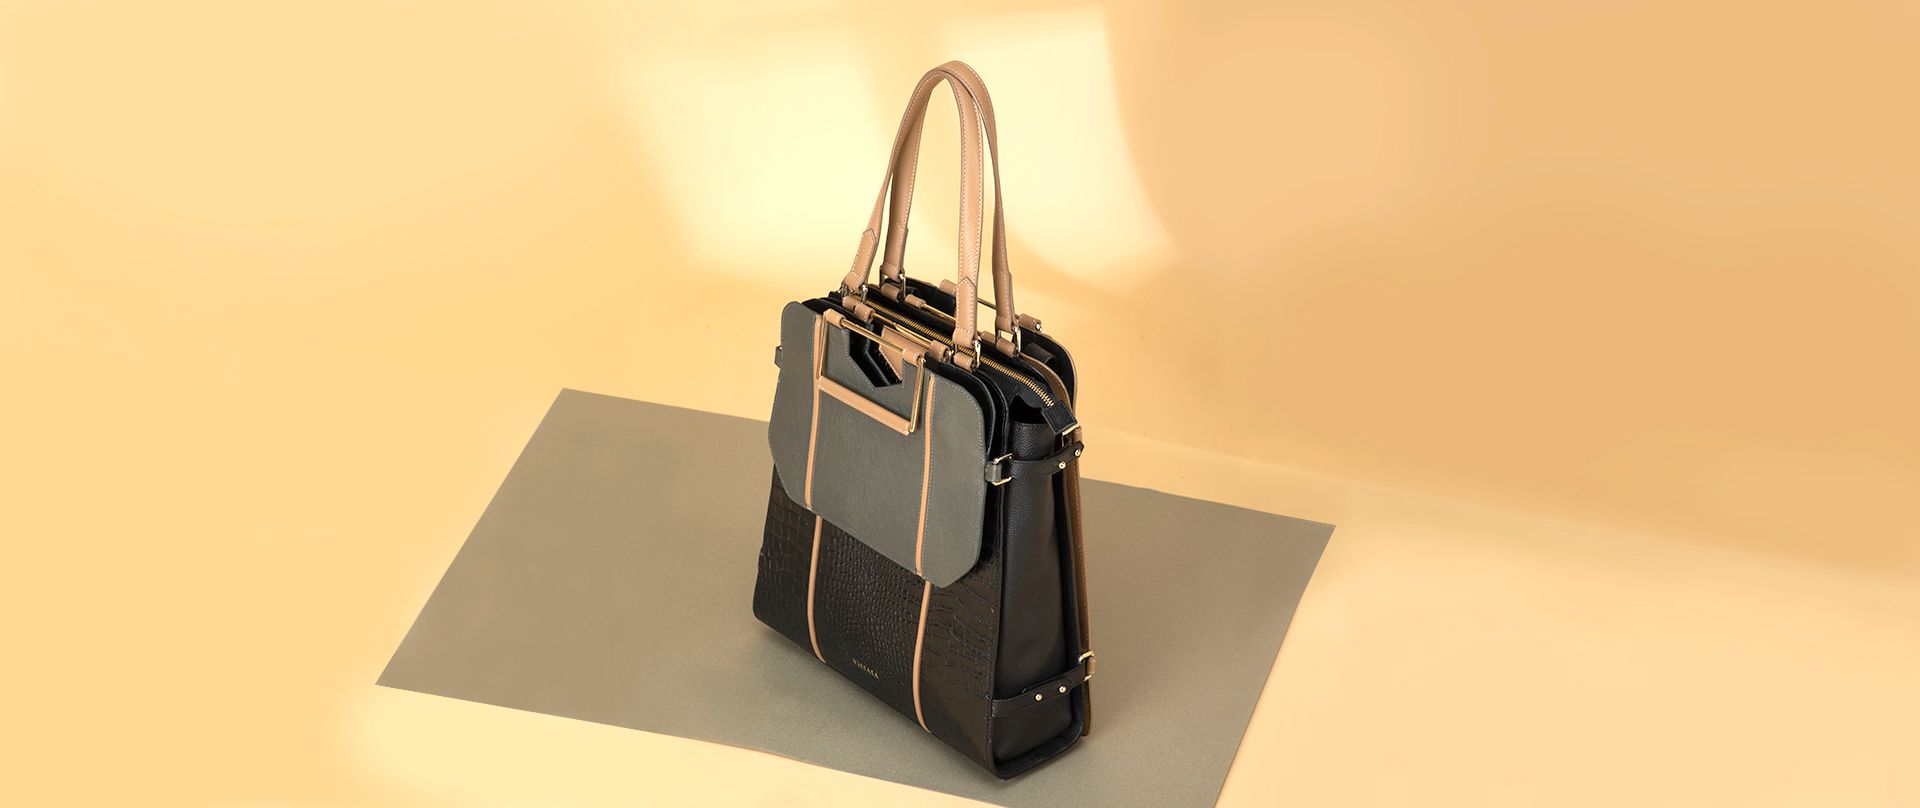 3-bags-in-1 with Metallic Smoke leather Clutch attached to Carry-All Bag